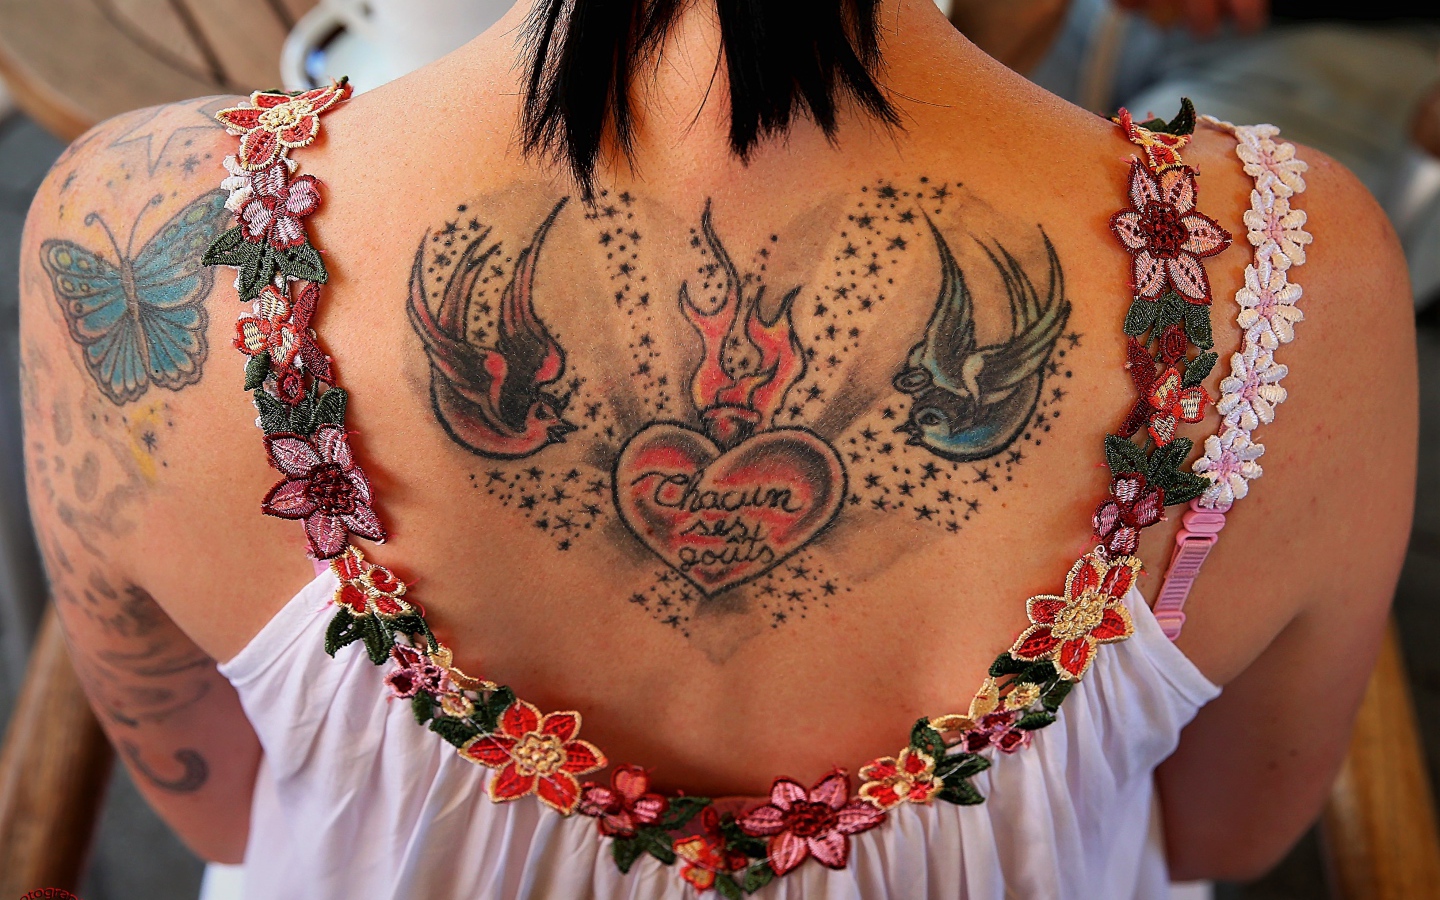 Large tattoo on the back of a girl in a white dress